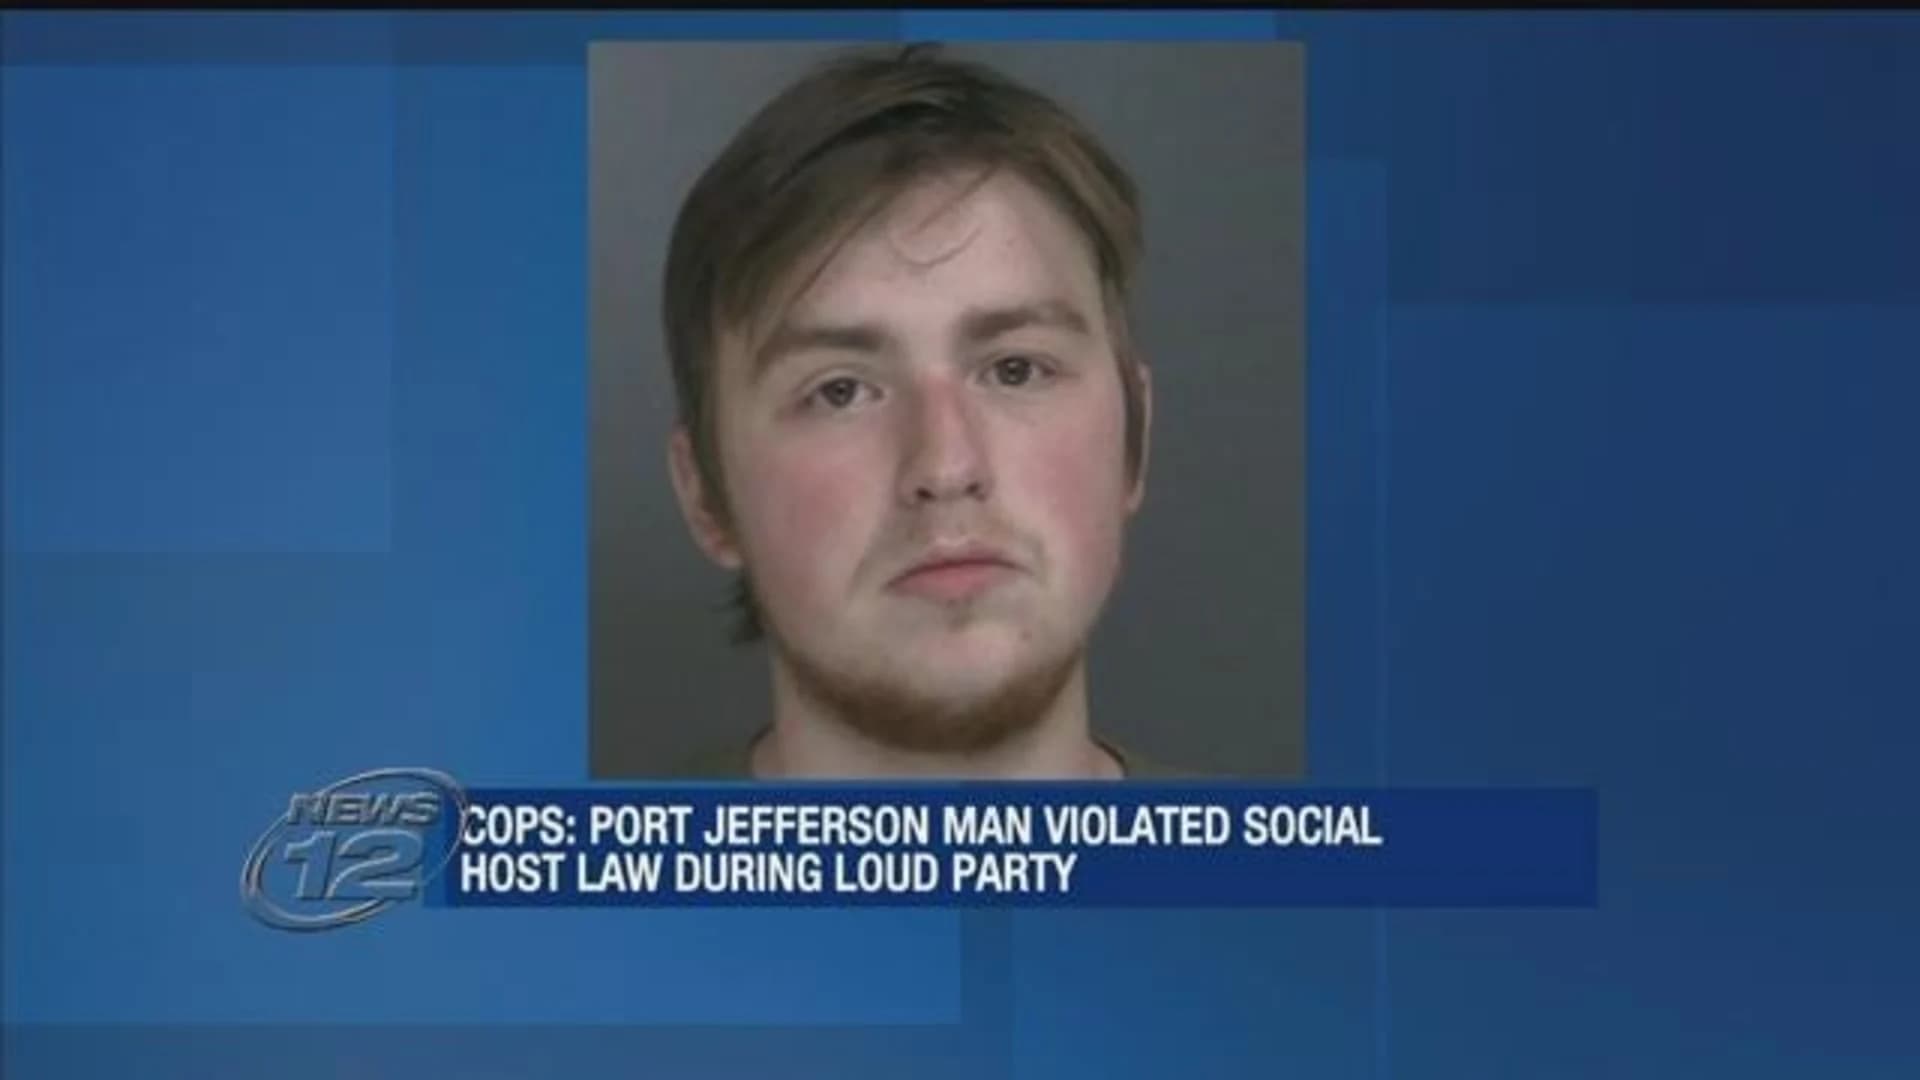 Port Jeff man charged after alleged underage drinking party